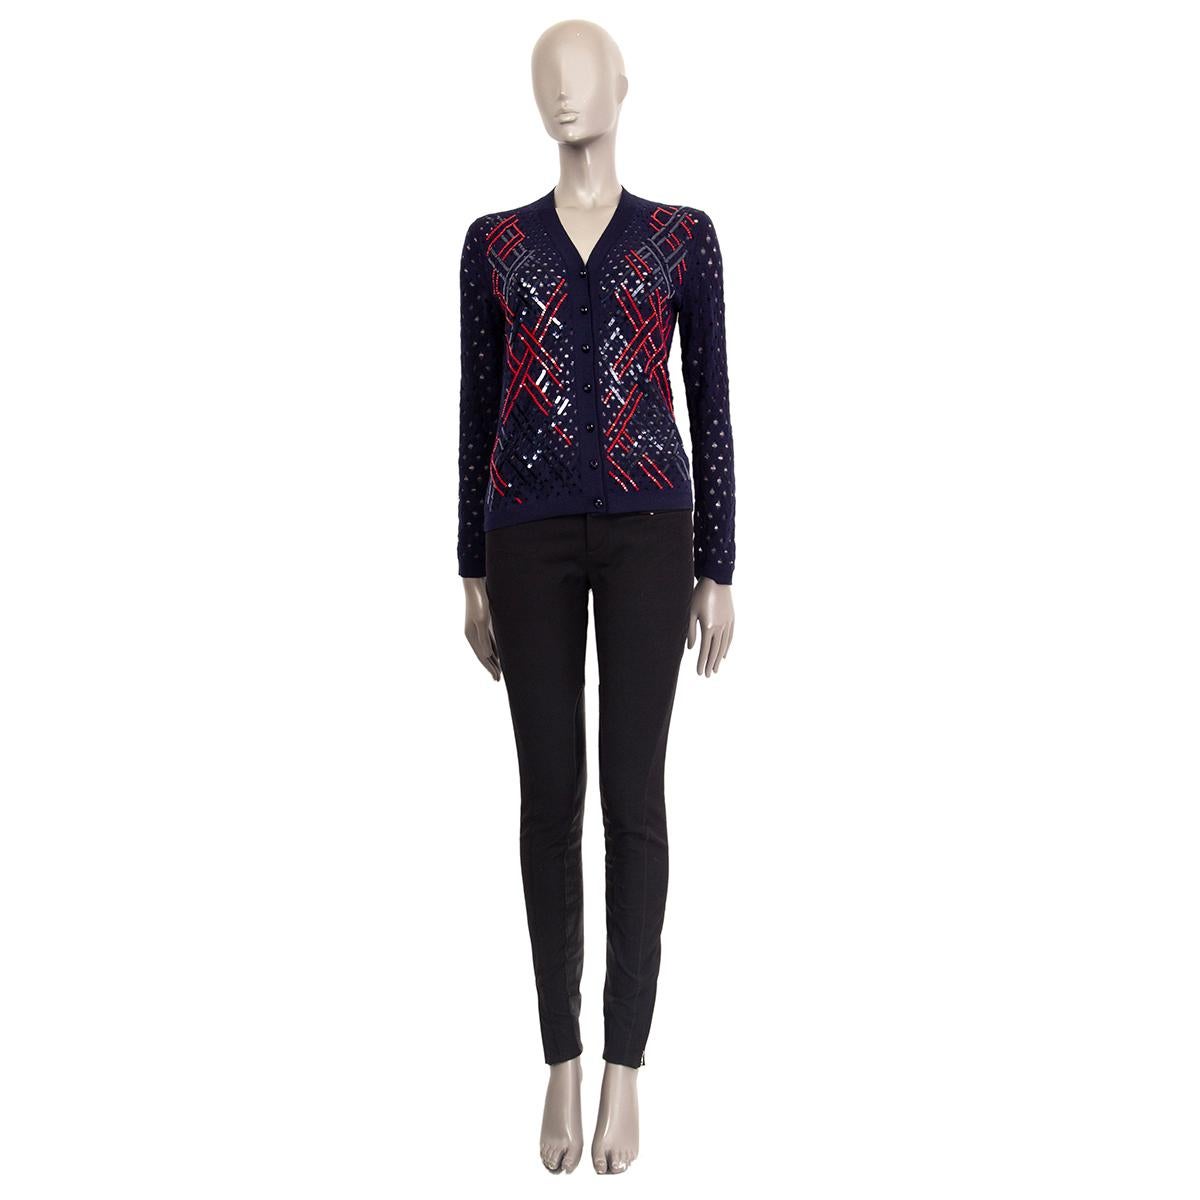 100% authentic Louis Vuitton button-front cardigan in navy blue wool (100%) with holes and embellished with coral red and midnight blue sequins. Has been worn and is in excellent condition.

Measurements
Tag Size	S
Size	S
Shoulder Width	36cm